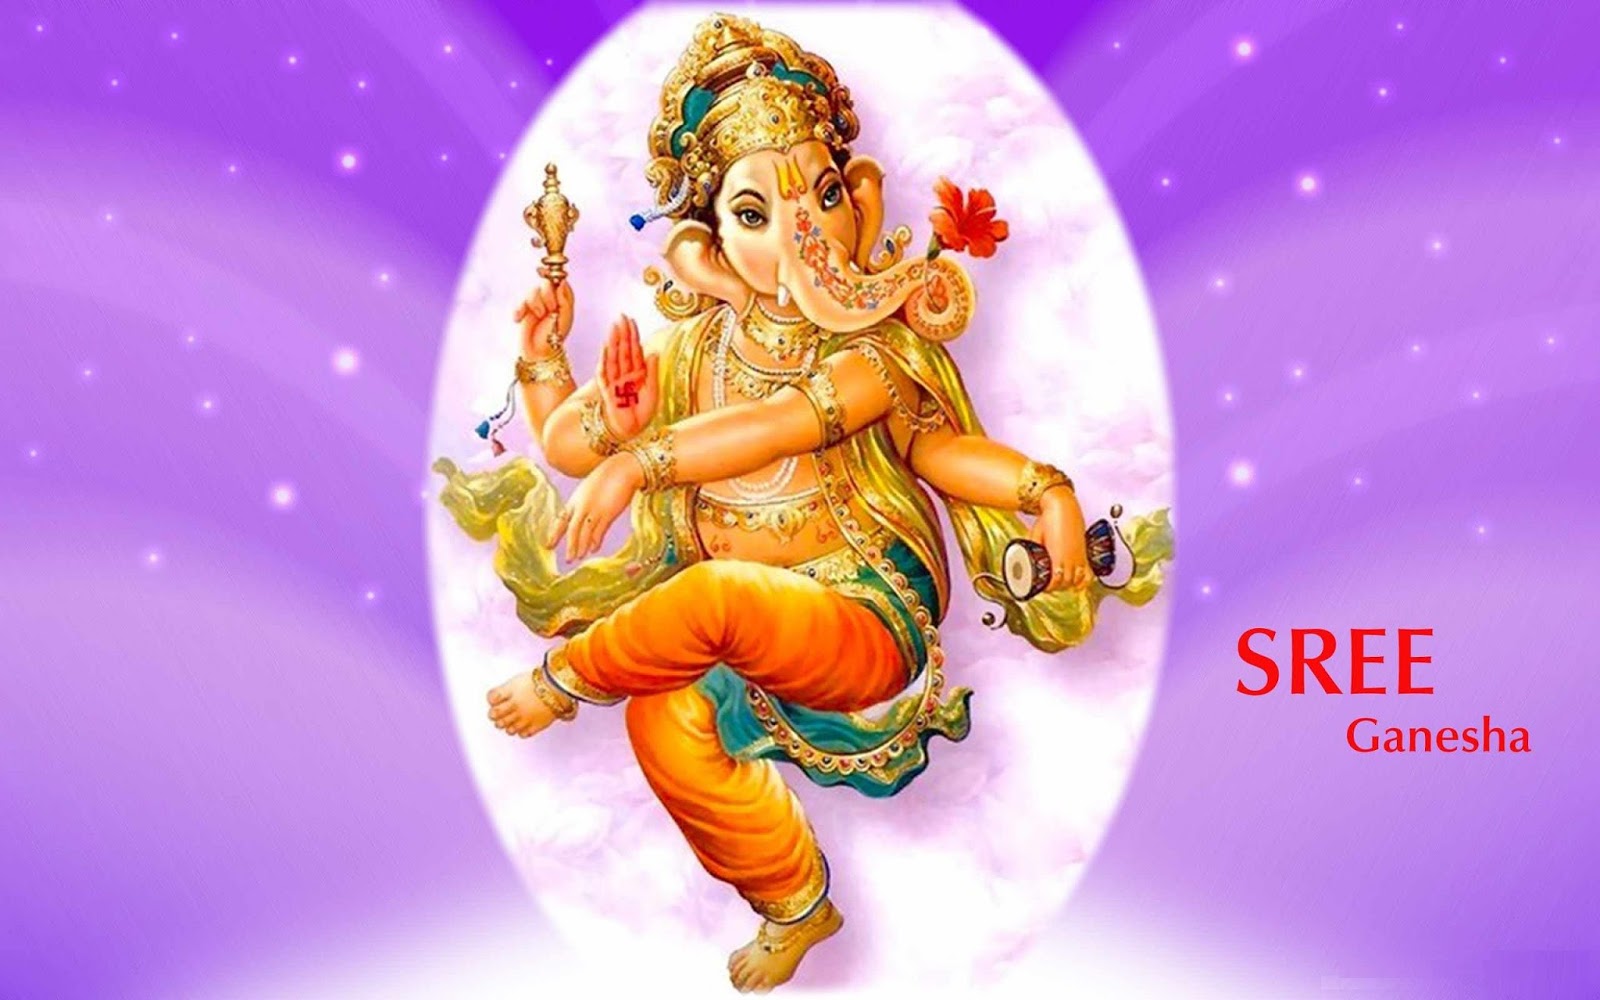 Festival Chaska: Free Lord Ganesha High Quality Pictures Download